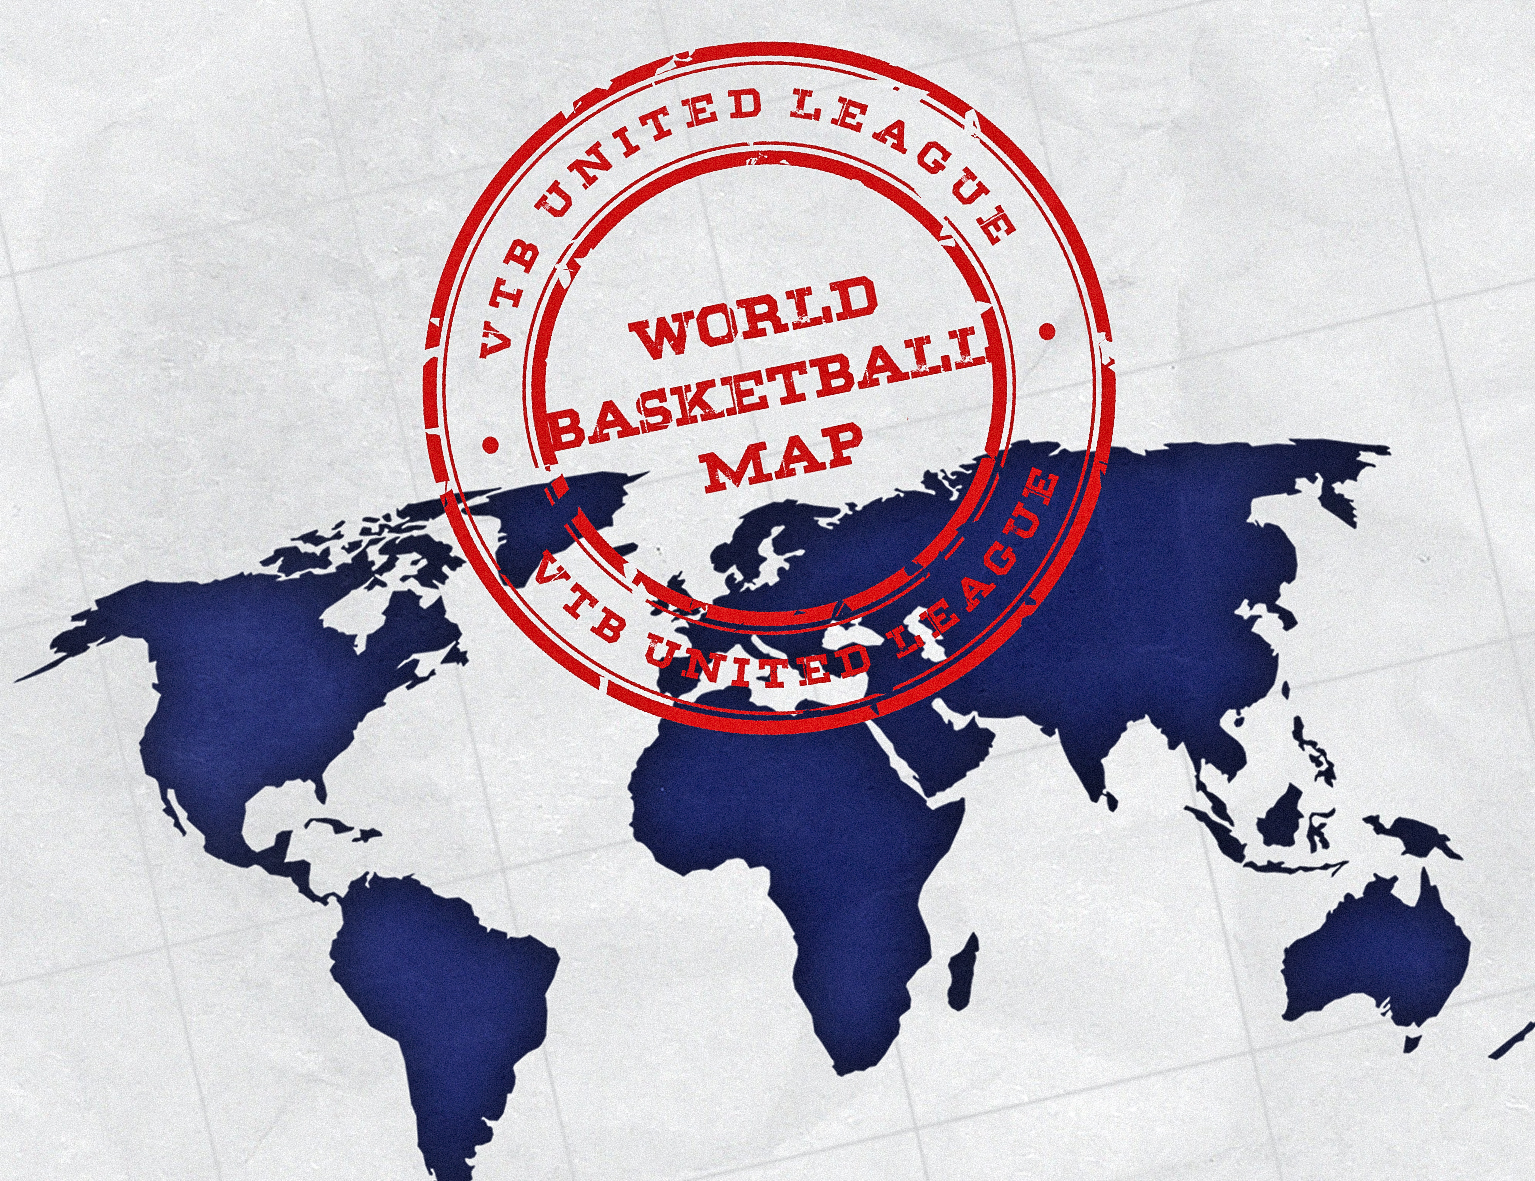 VTB United League starts ambitious project “World basketball map”